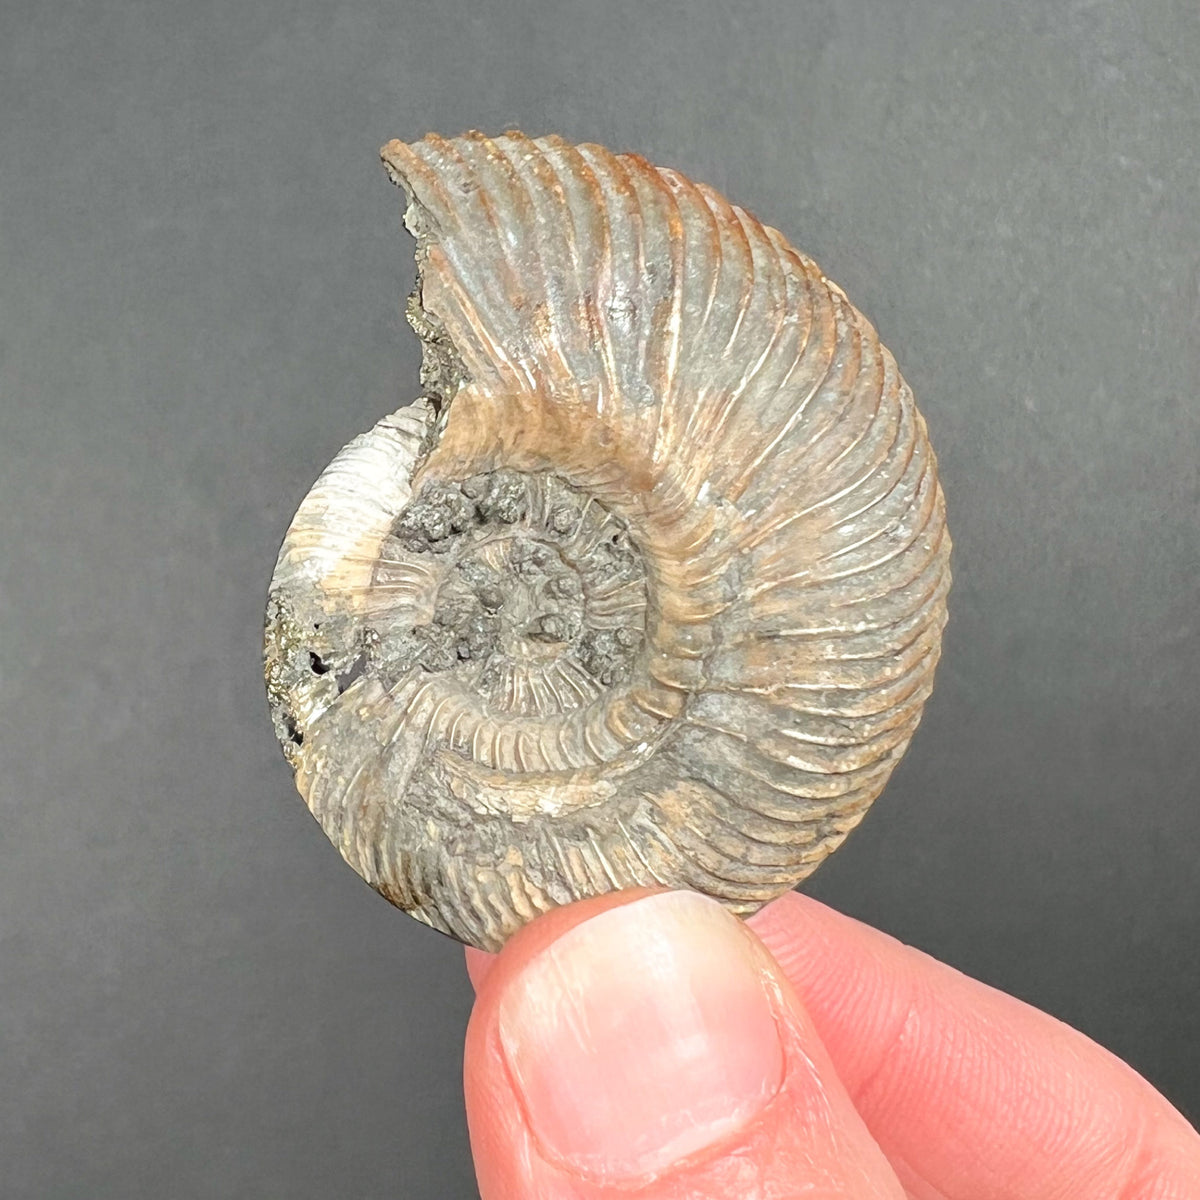 Back of Ammonite Fossil